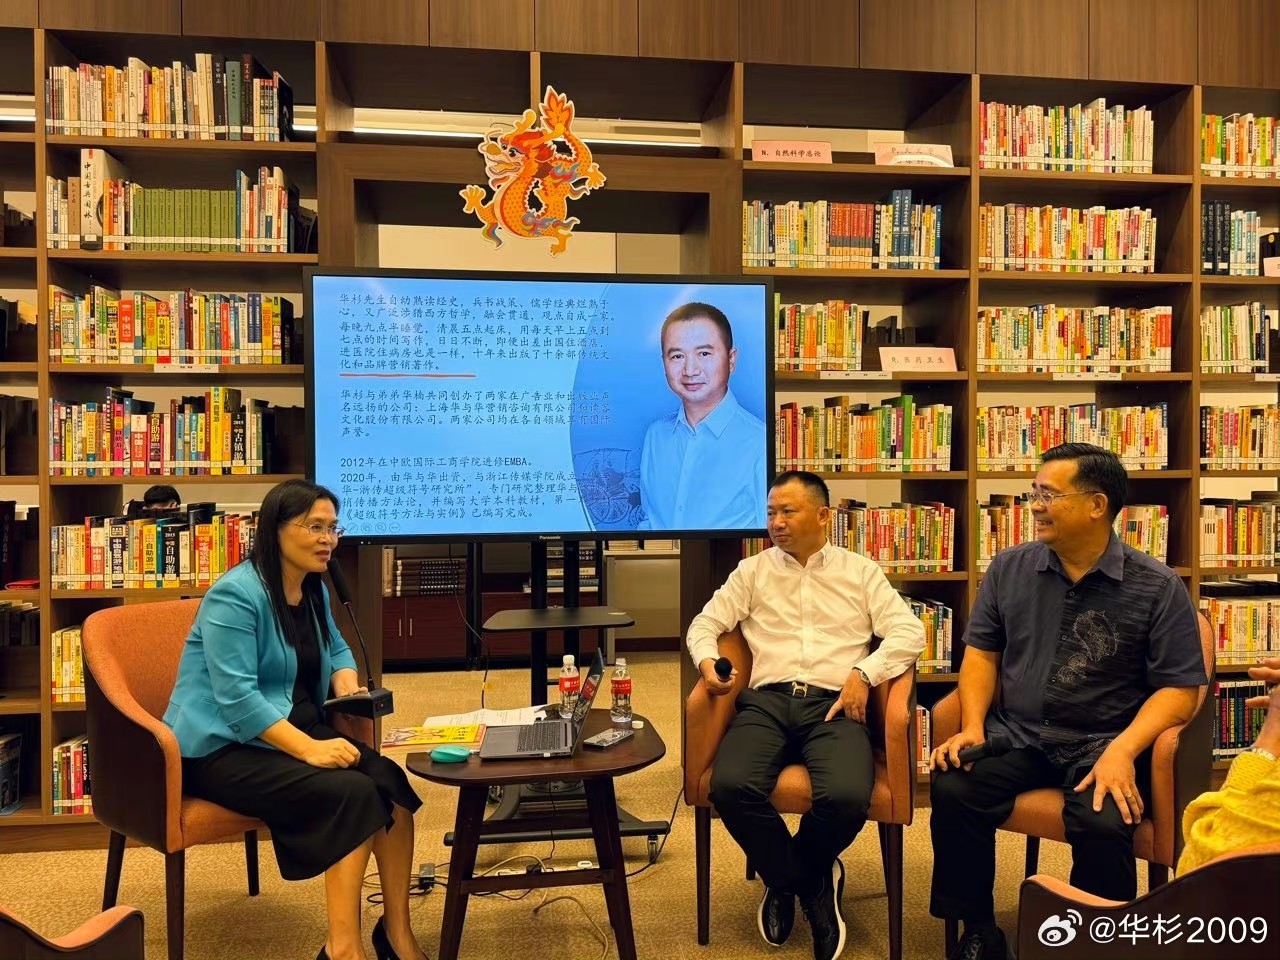 Mr. Sam Hua was invited as a guest speaker by the renowned Singaporean cultural scholar, Ms. Wang Hongyu